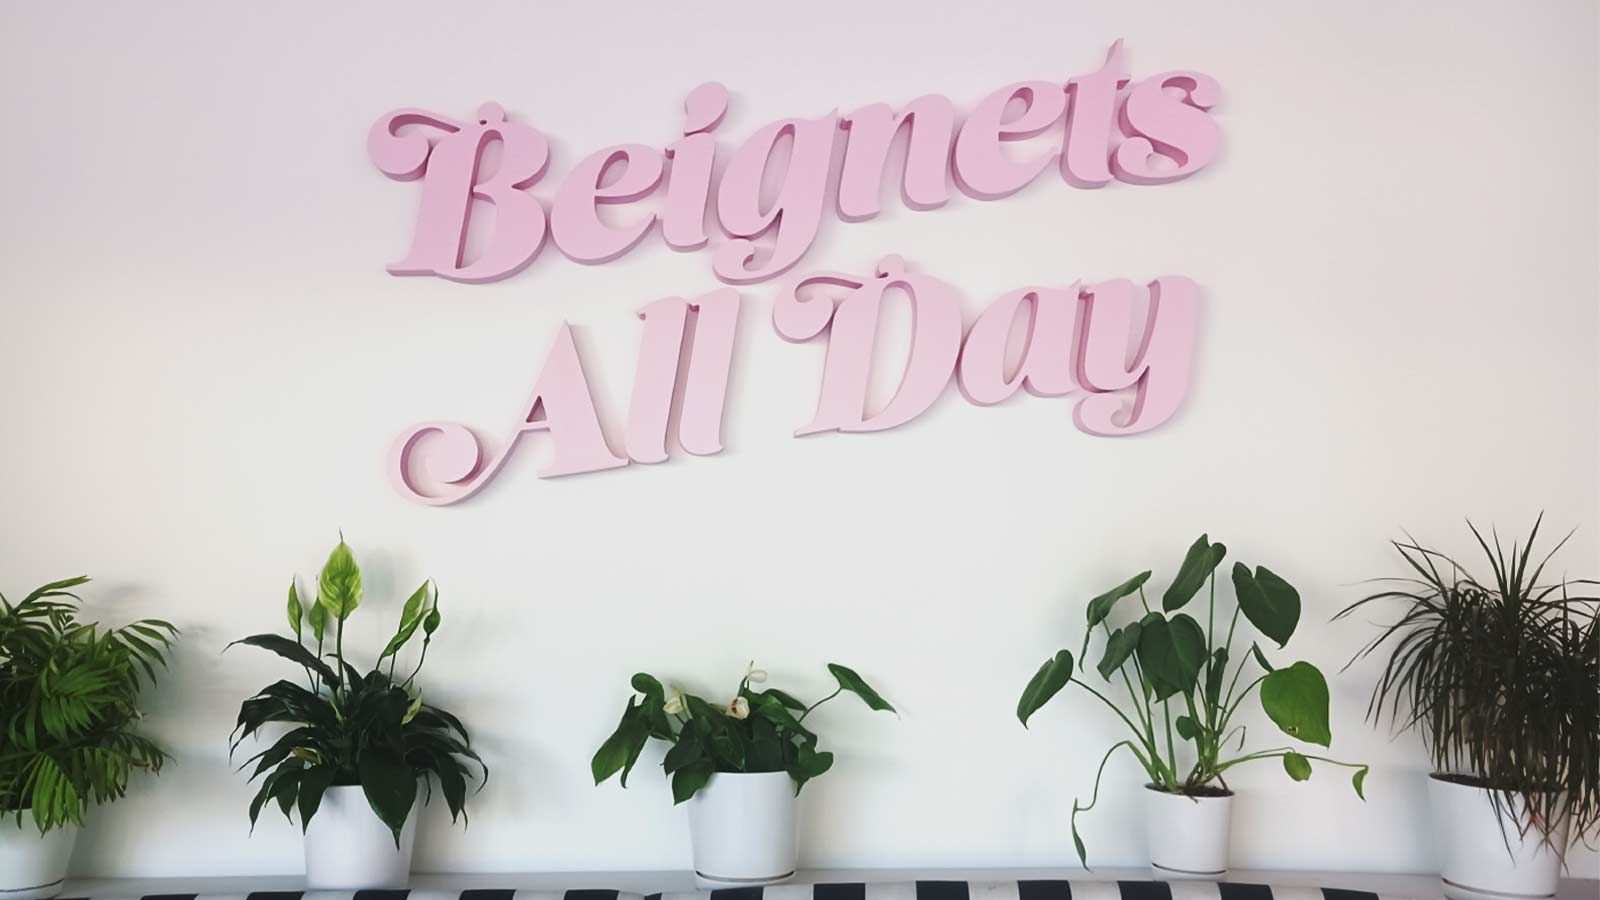 Beignets All Day interior sign attached to the wall